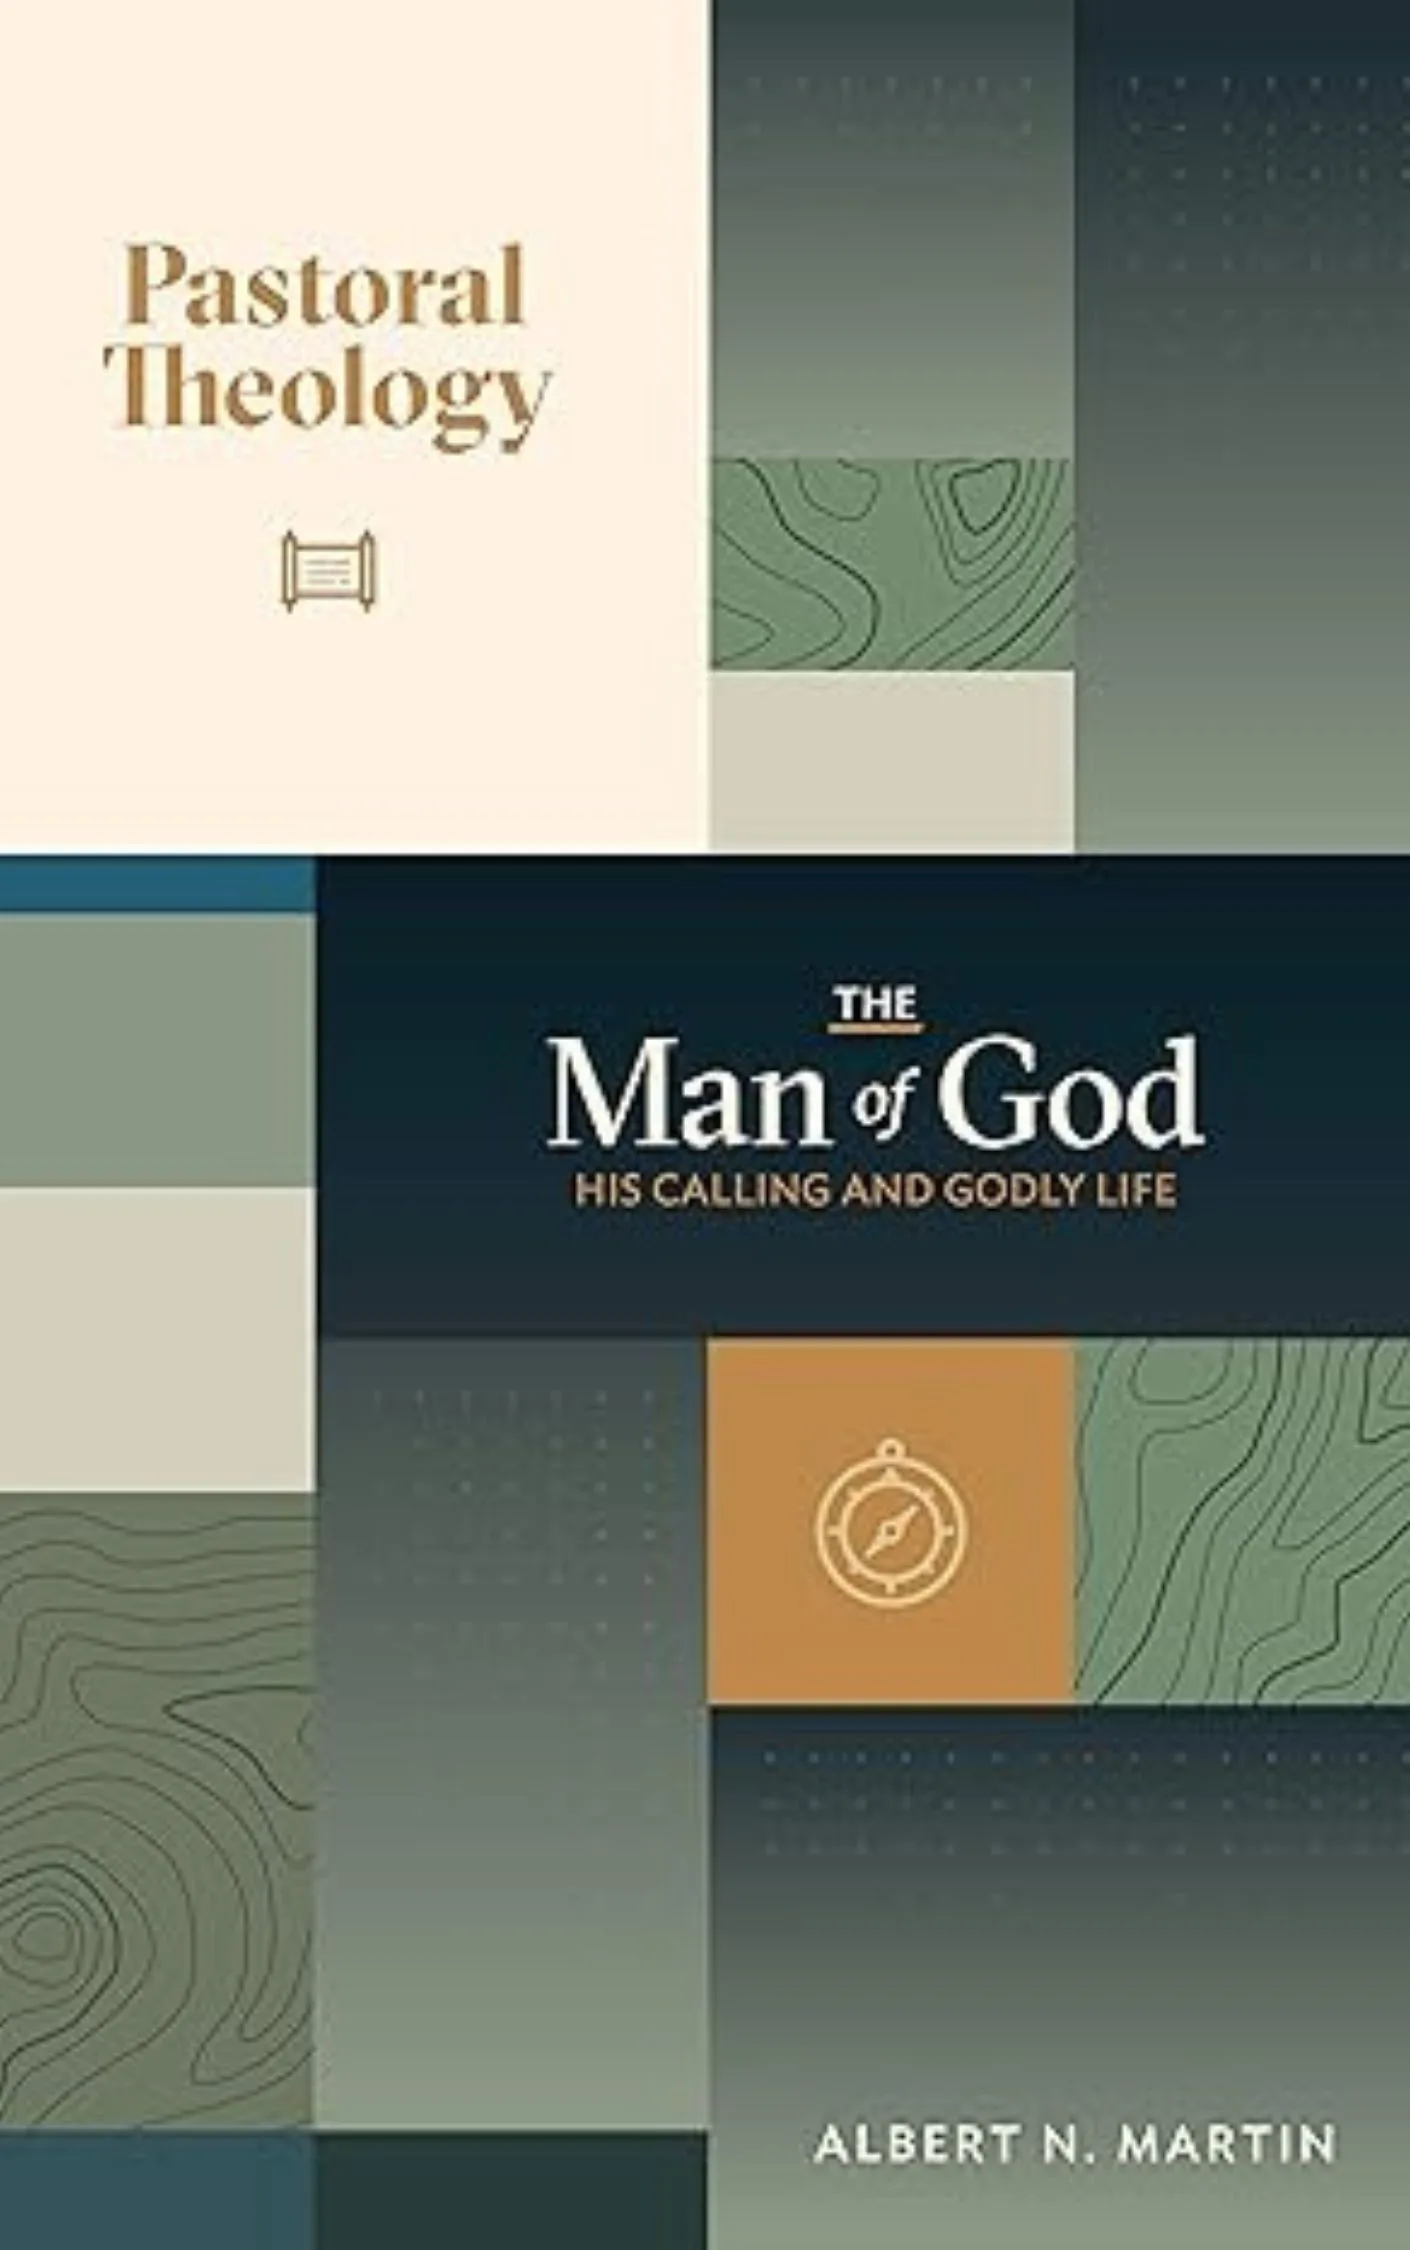 Pastoral Theology by Al Martin